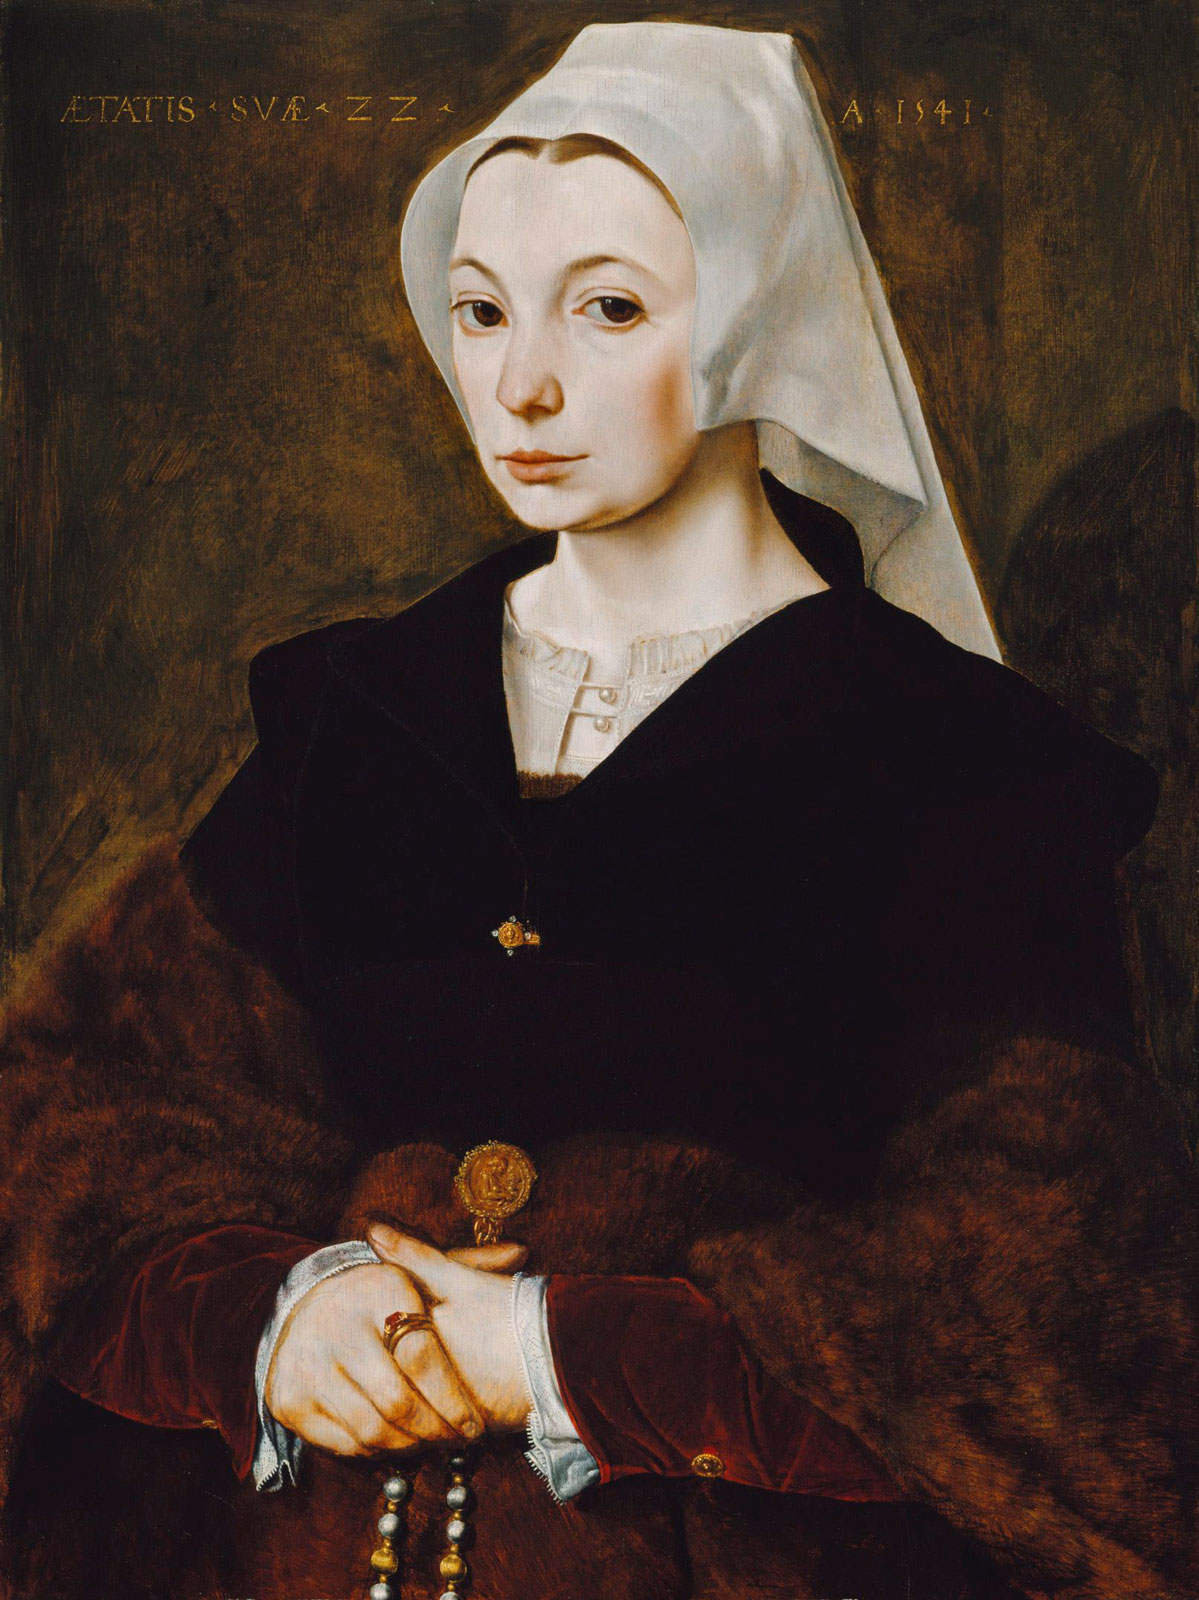 The Master of the 1540s (Flanders, active 1541-1551) Portrait of a young woman 1541 oil on panel, 59.5 x 44.9 cm Art Gallery of New South Wales Gift of James Fairfax AC 1993 Photo: AGNSW 482.1993